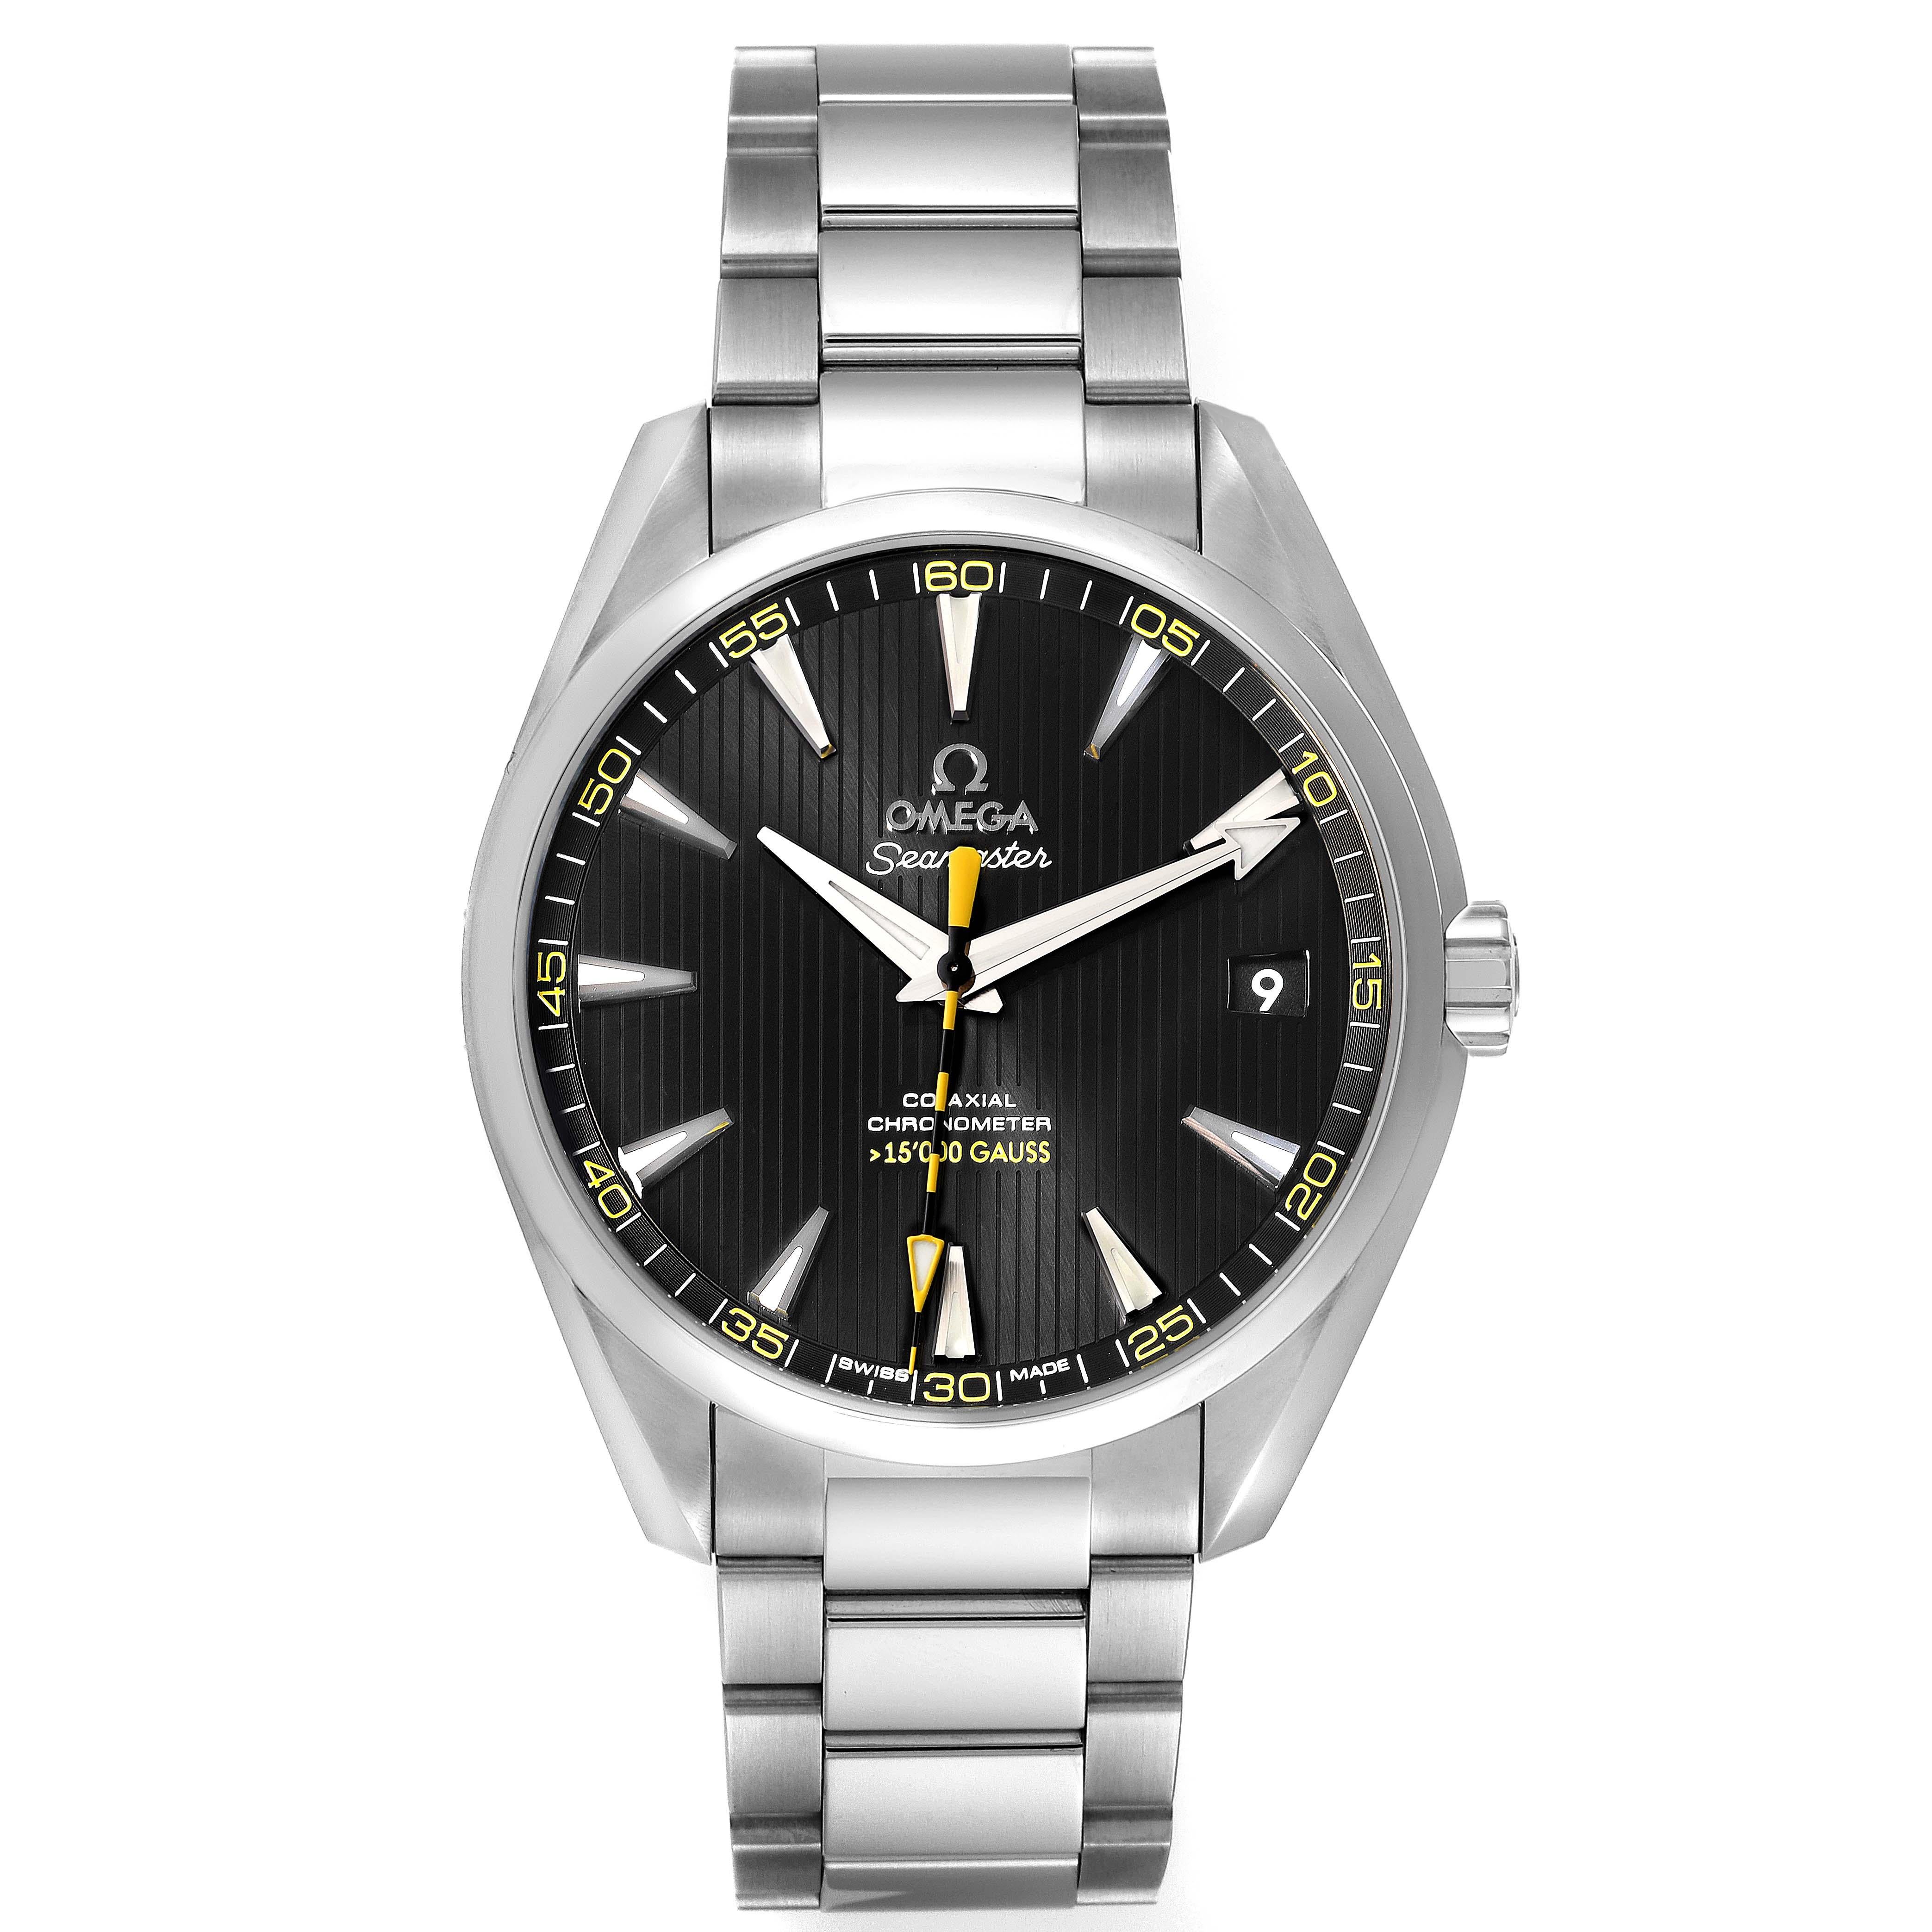 Omega Seamaster Aqua Terra Steel Mens Watch 231.10.42.21.01.002 Box Card. Automatic self-winding movement with anti-magnetic Co-Axial Escapement. Caliber 8508. Free sprung-balance, 2 barrels mounted in series, automatic winding in both directions.